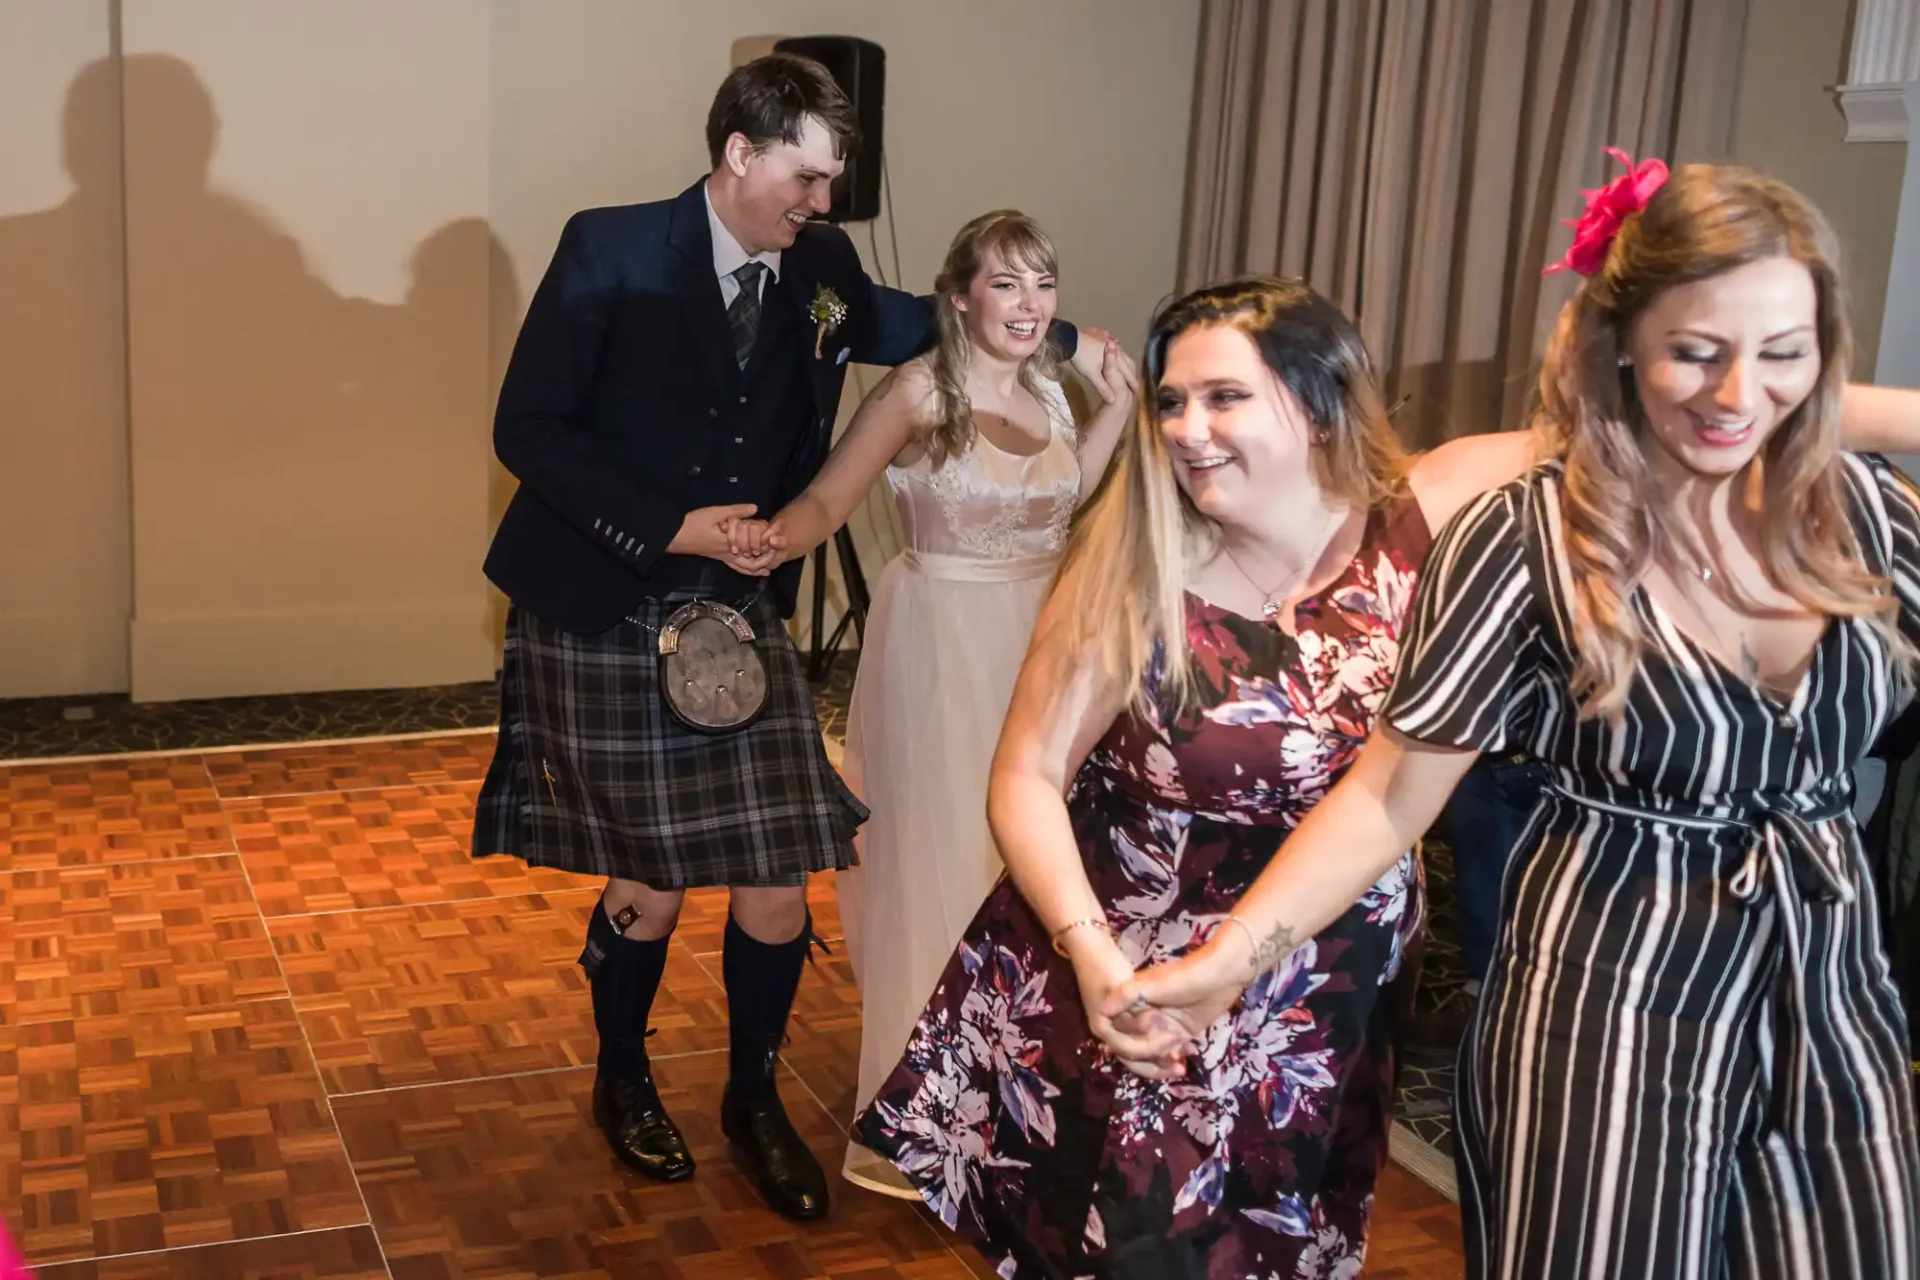 A group of people dancing joyfully at a wedding reception; one man wears a kilt and the women are dressed in floral and striped dresses.